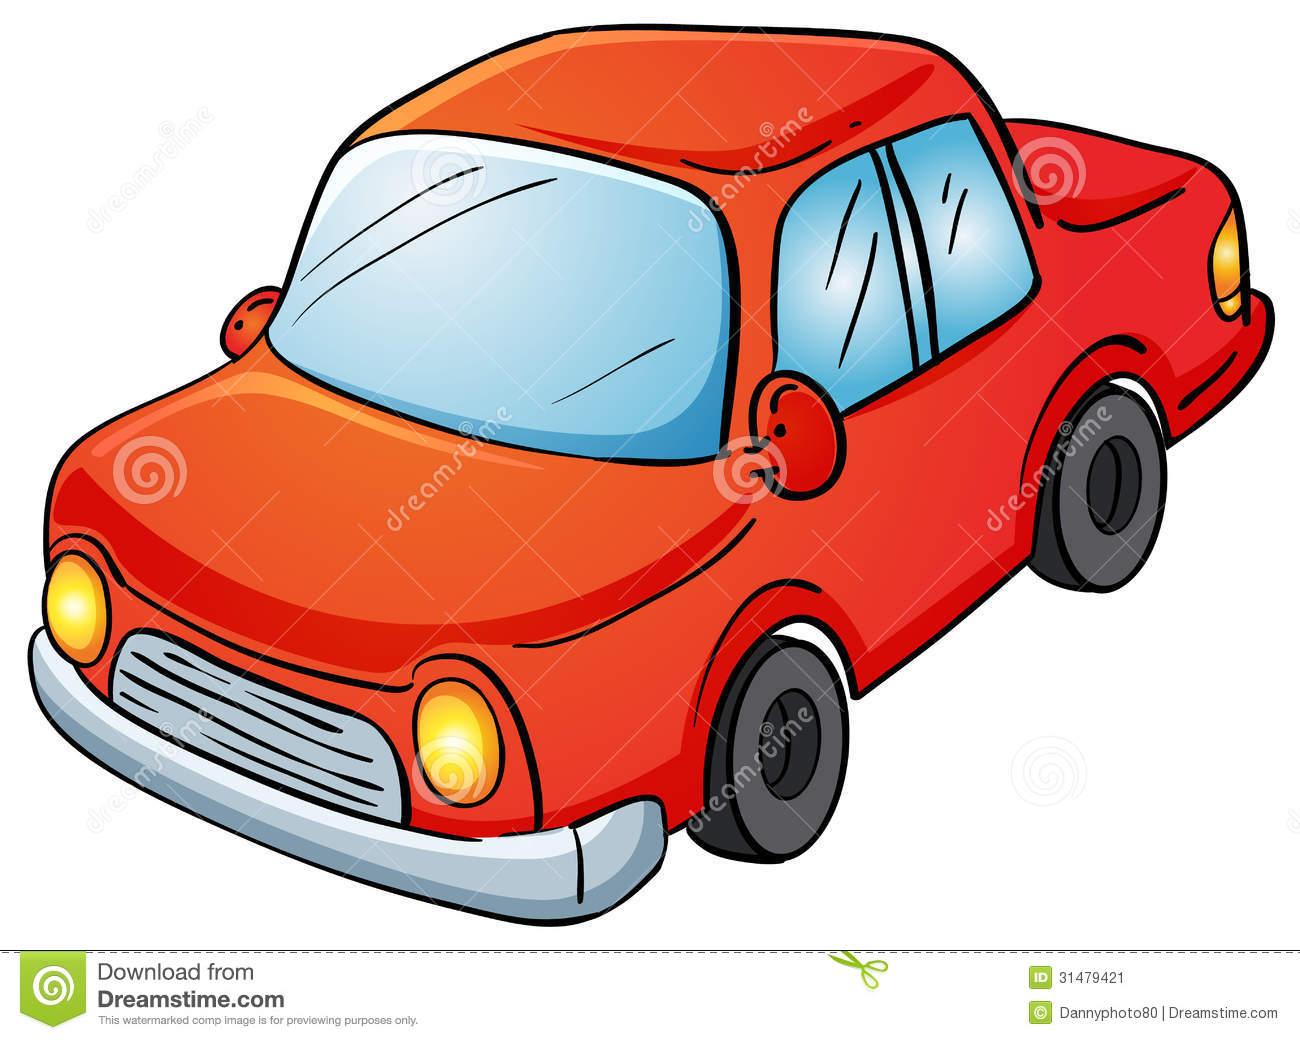 Toy Truck Clipart   Clipart Panda   Free Clipart Images